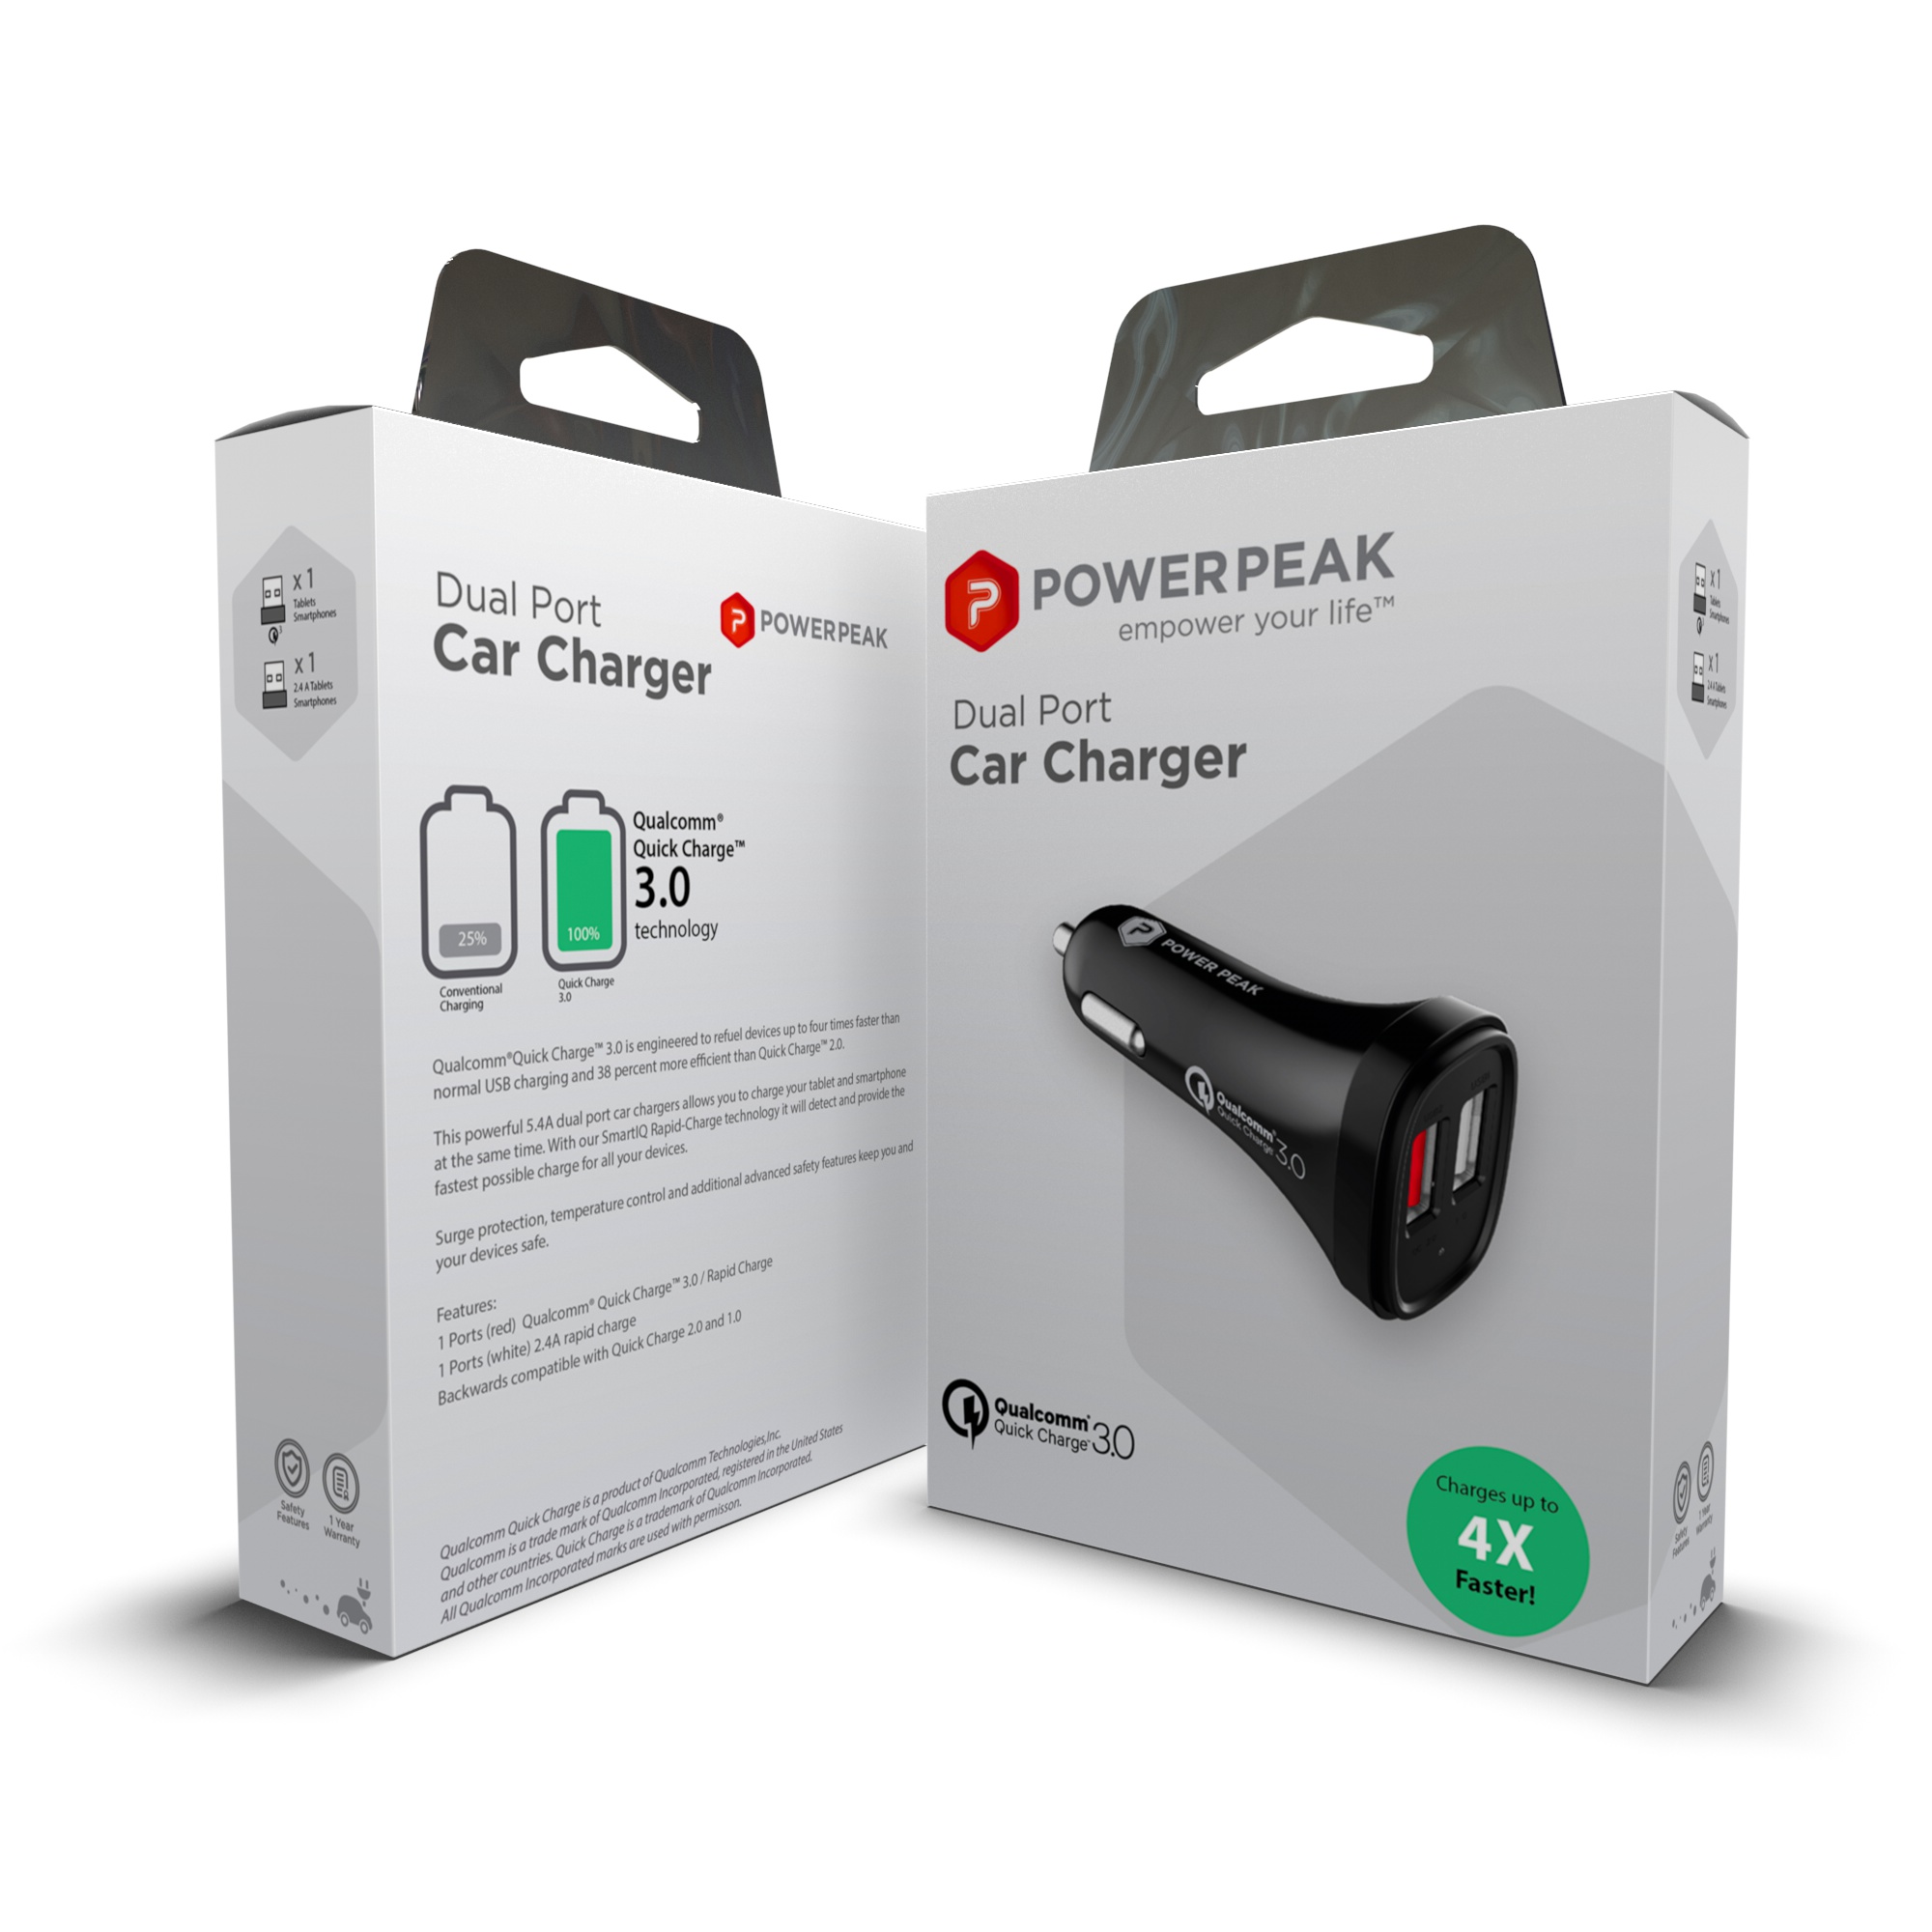 Dual Port Car Charger Quick Charge 3.0